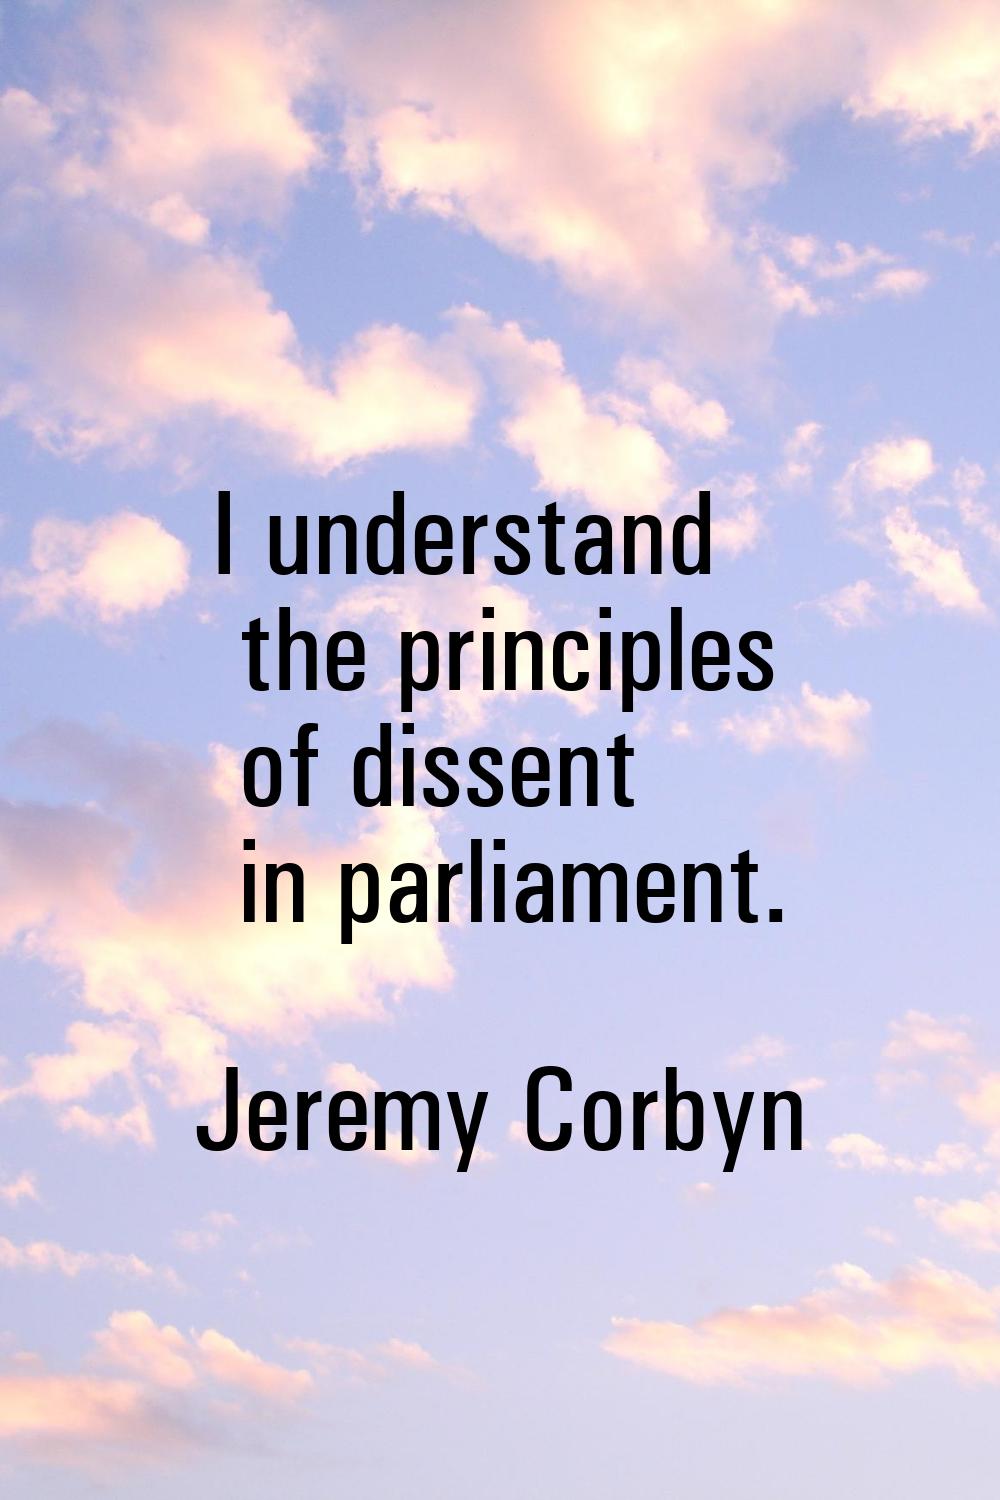 I understand the principles of dissent in parliament.